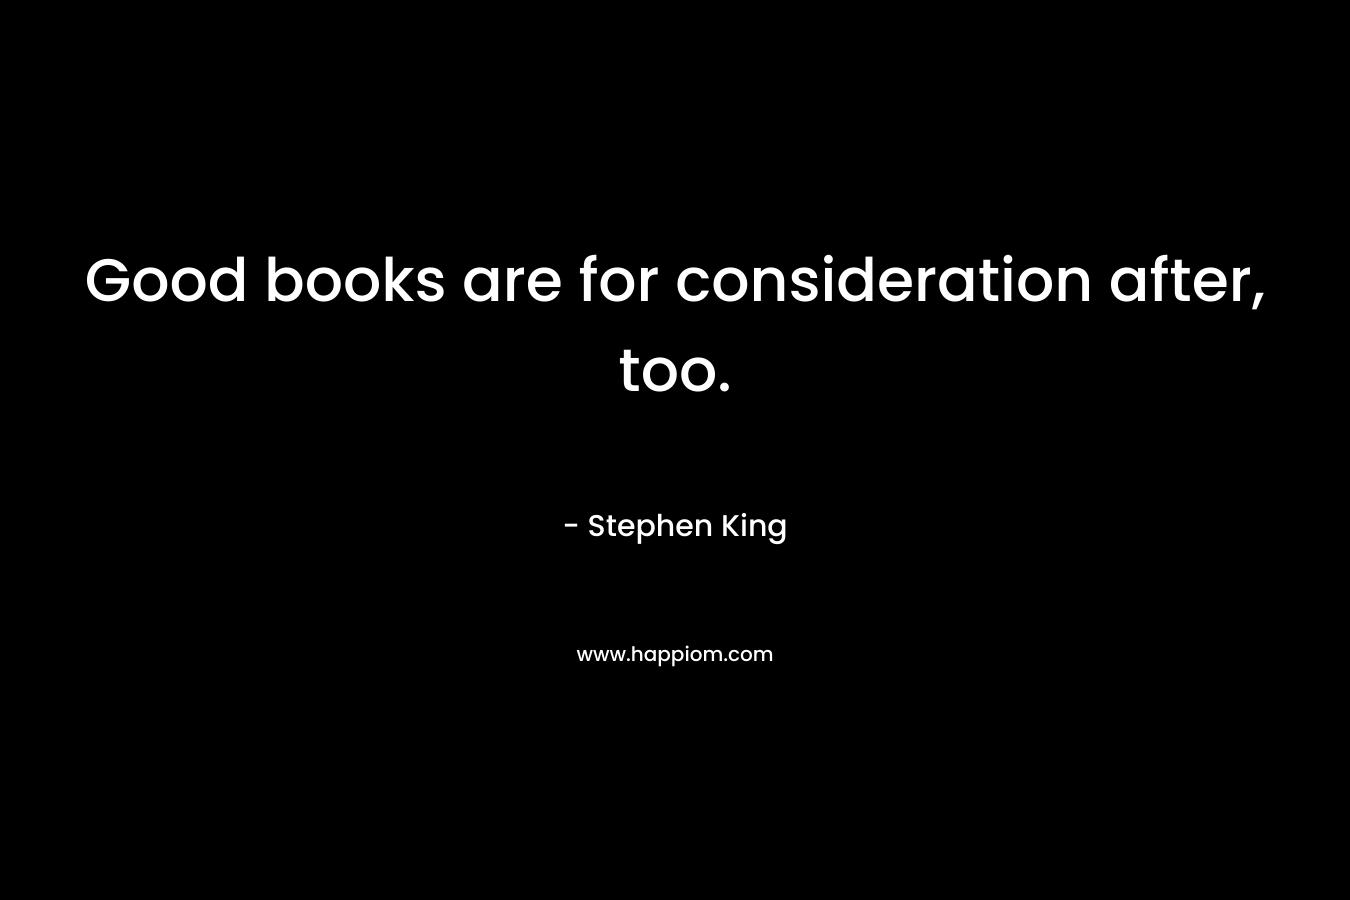 Good books are for consideration after, too.